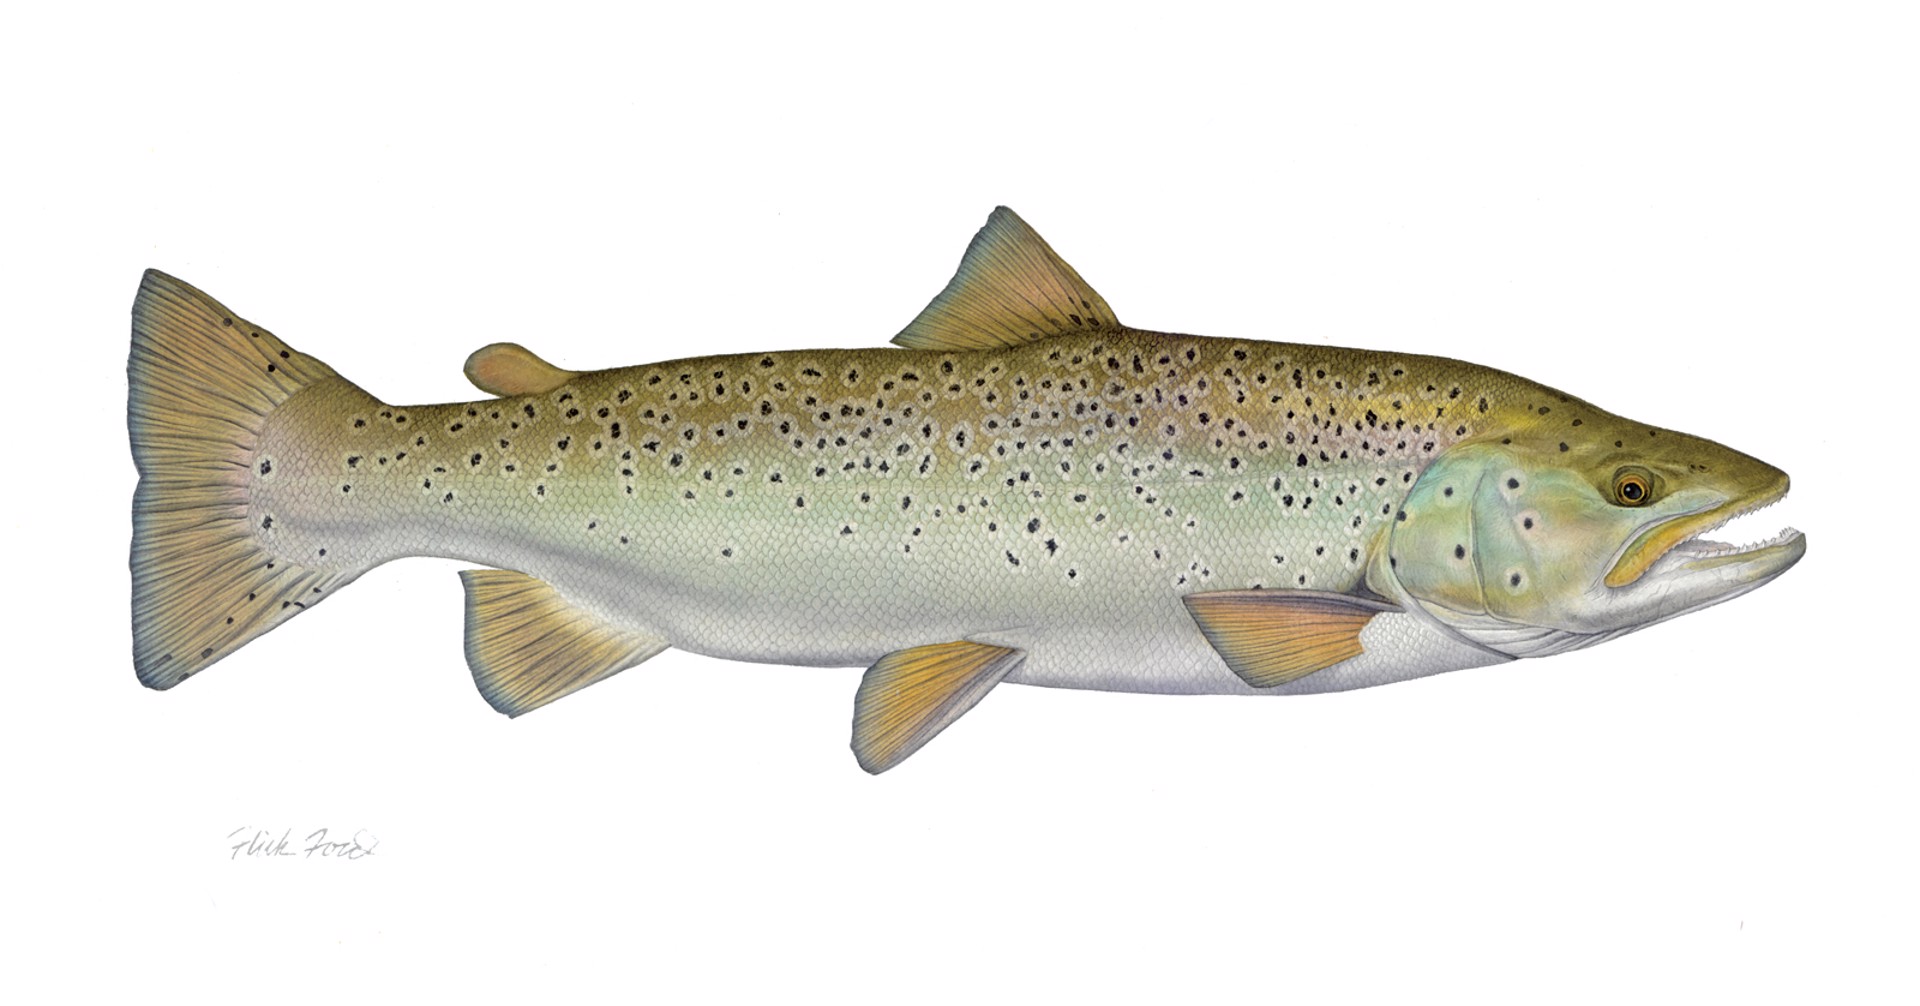 Saugatuck Salter - Sea Run Brown Trout by Flick Ford